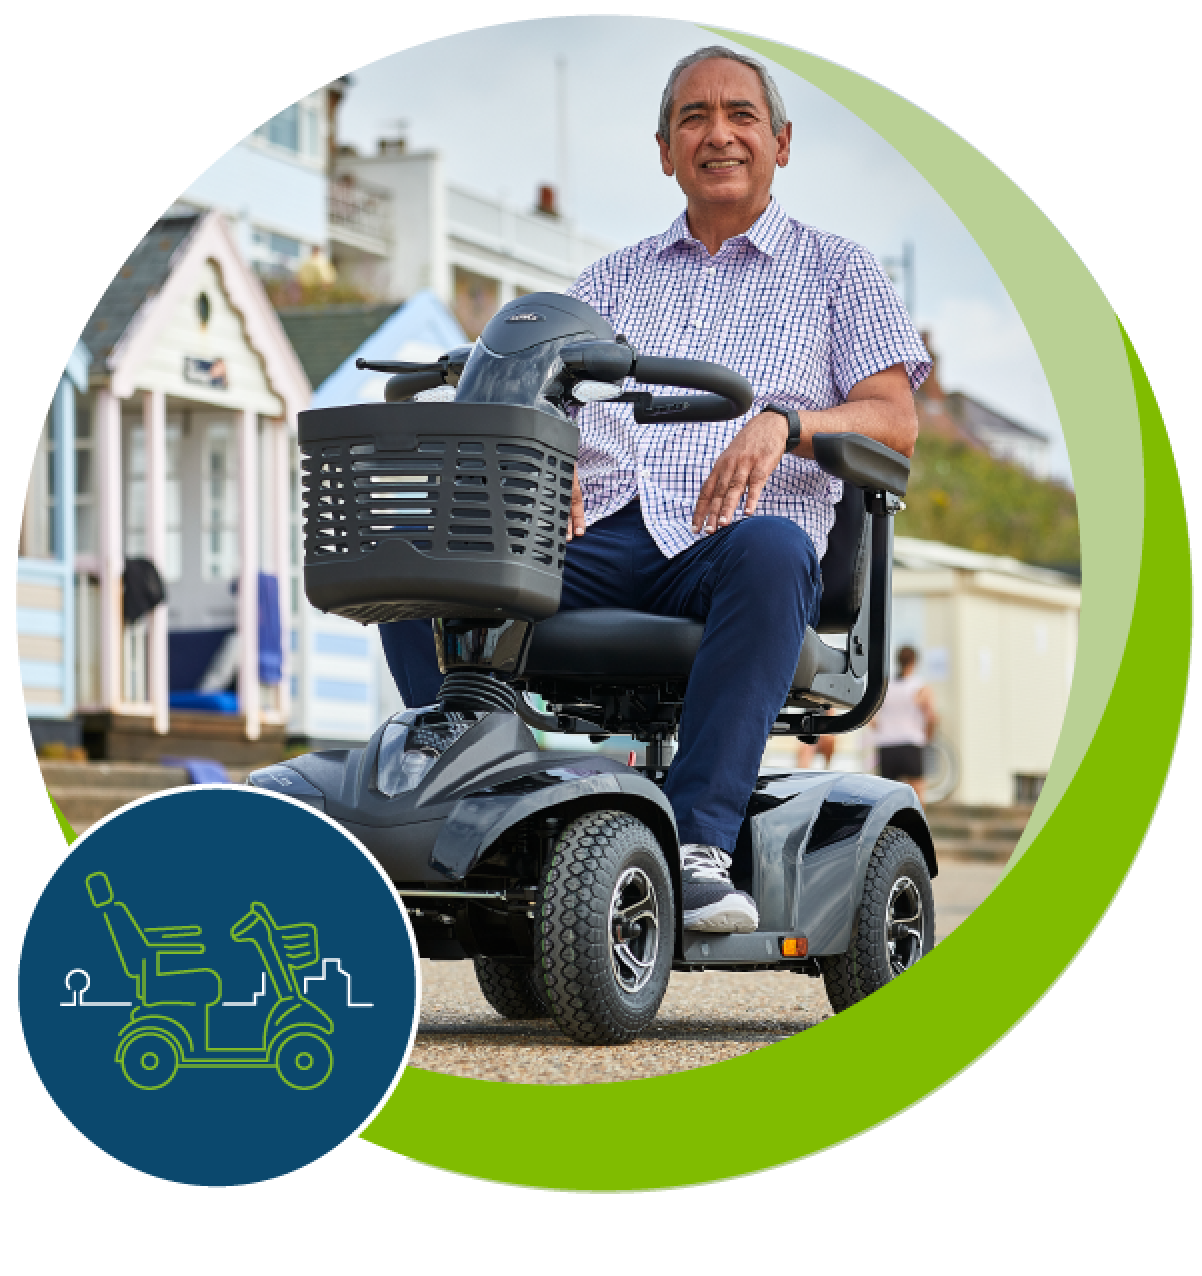 mobility scooter travel insurance